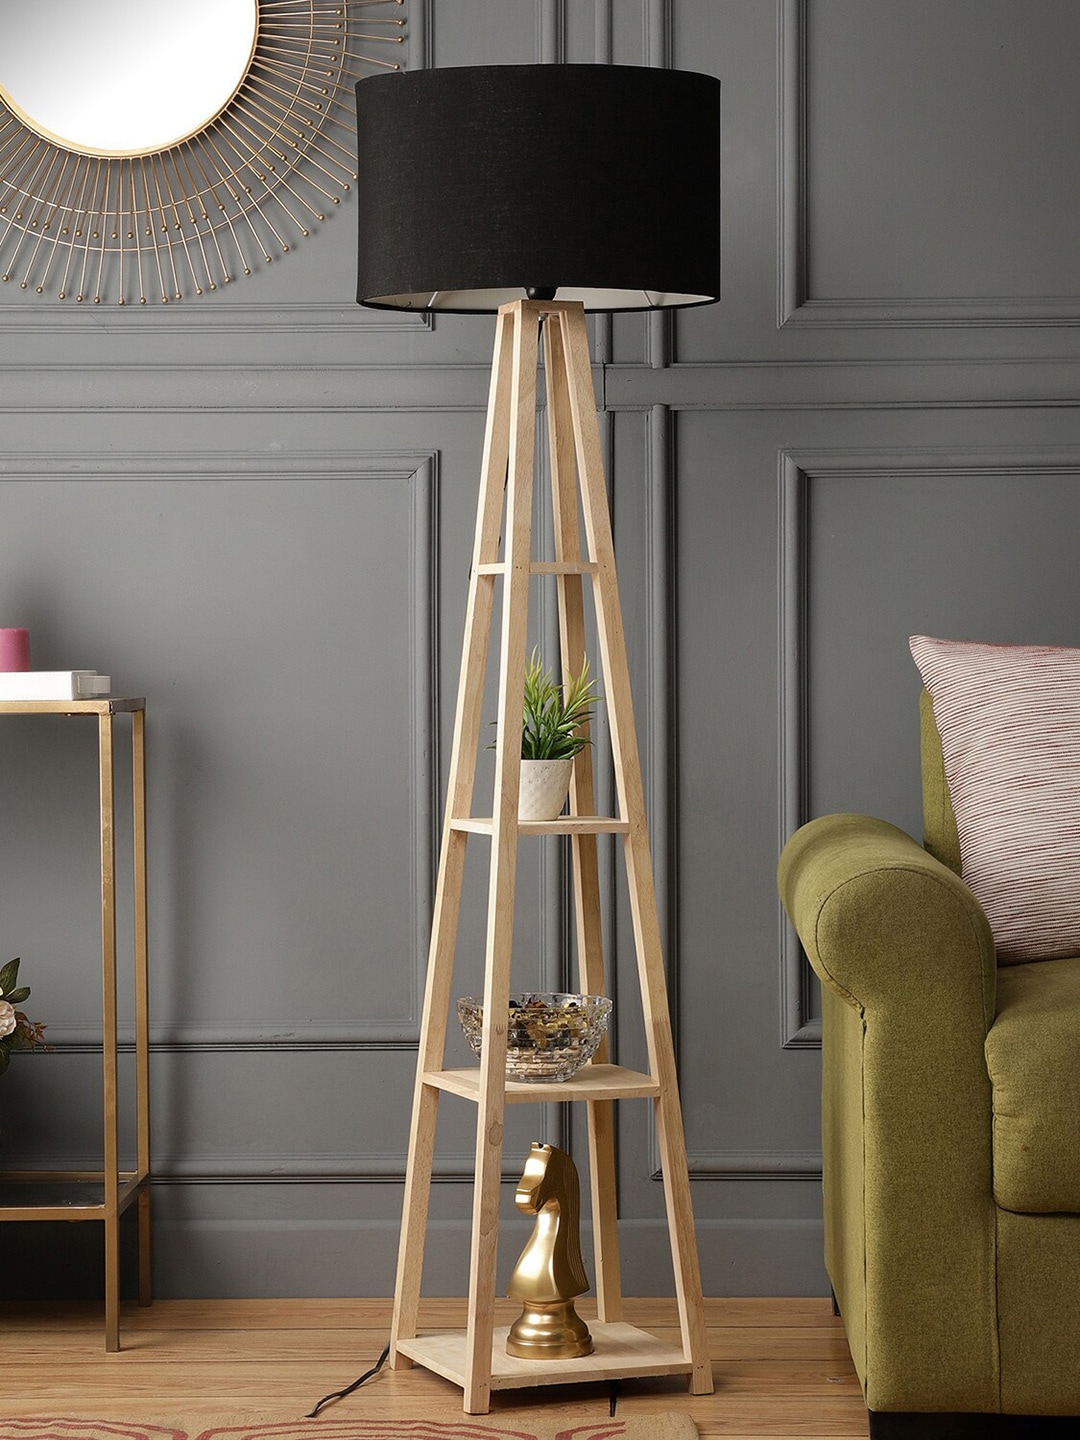 SANDED EDGE Beige & Black 3-Tier Wooden Floor Lamp With Shade Price in India